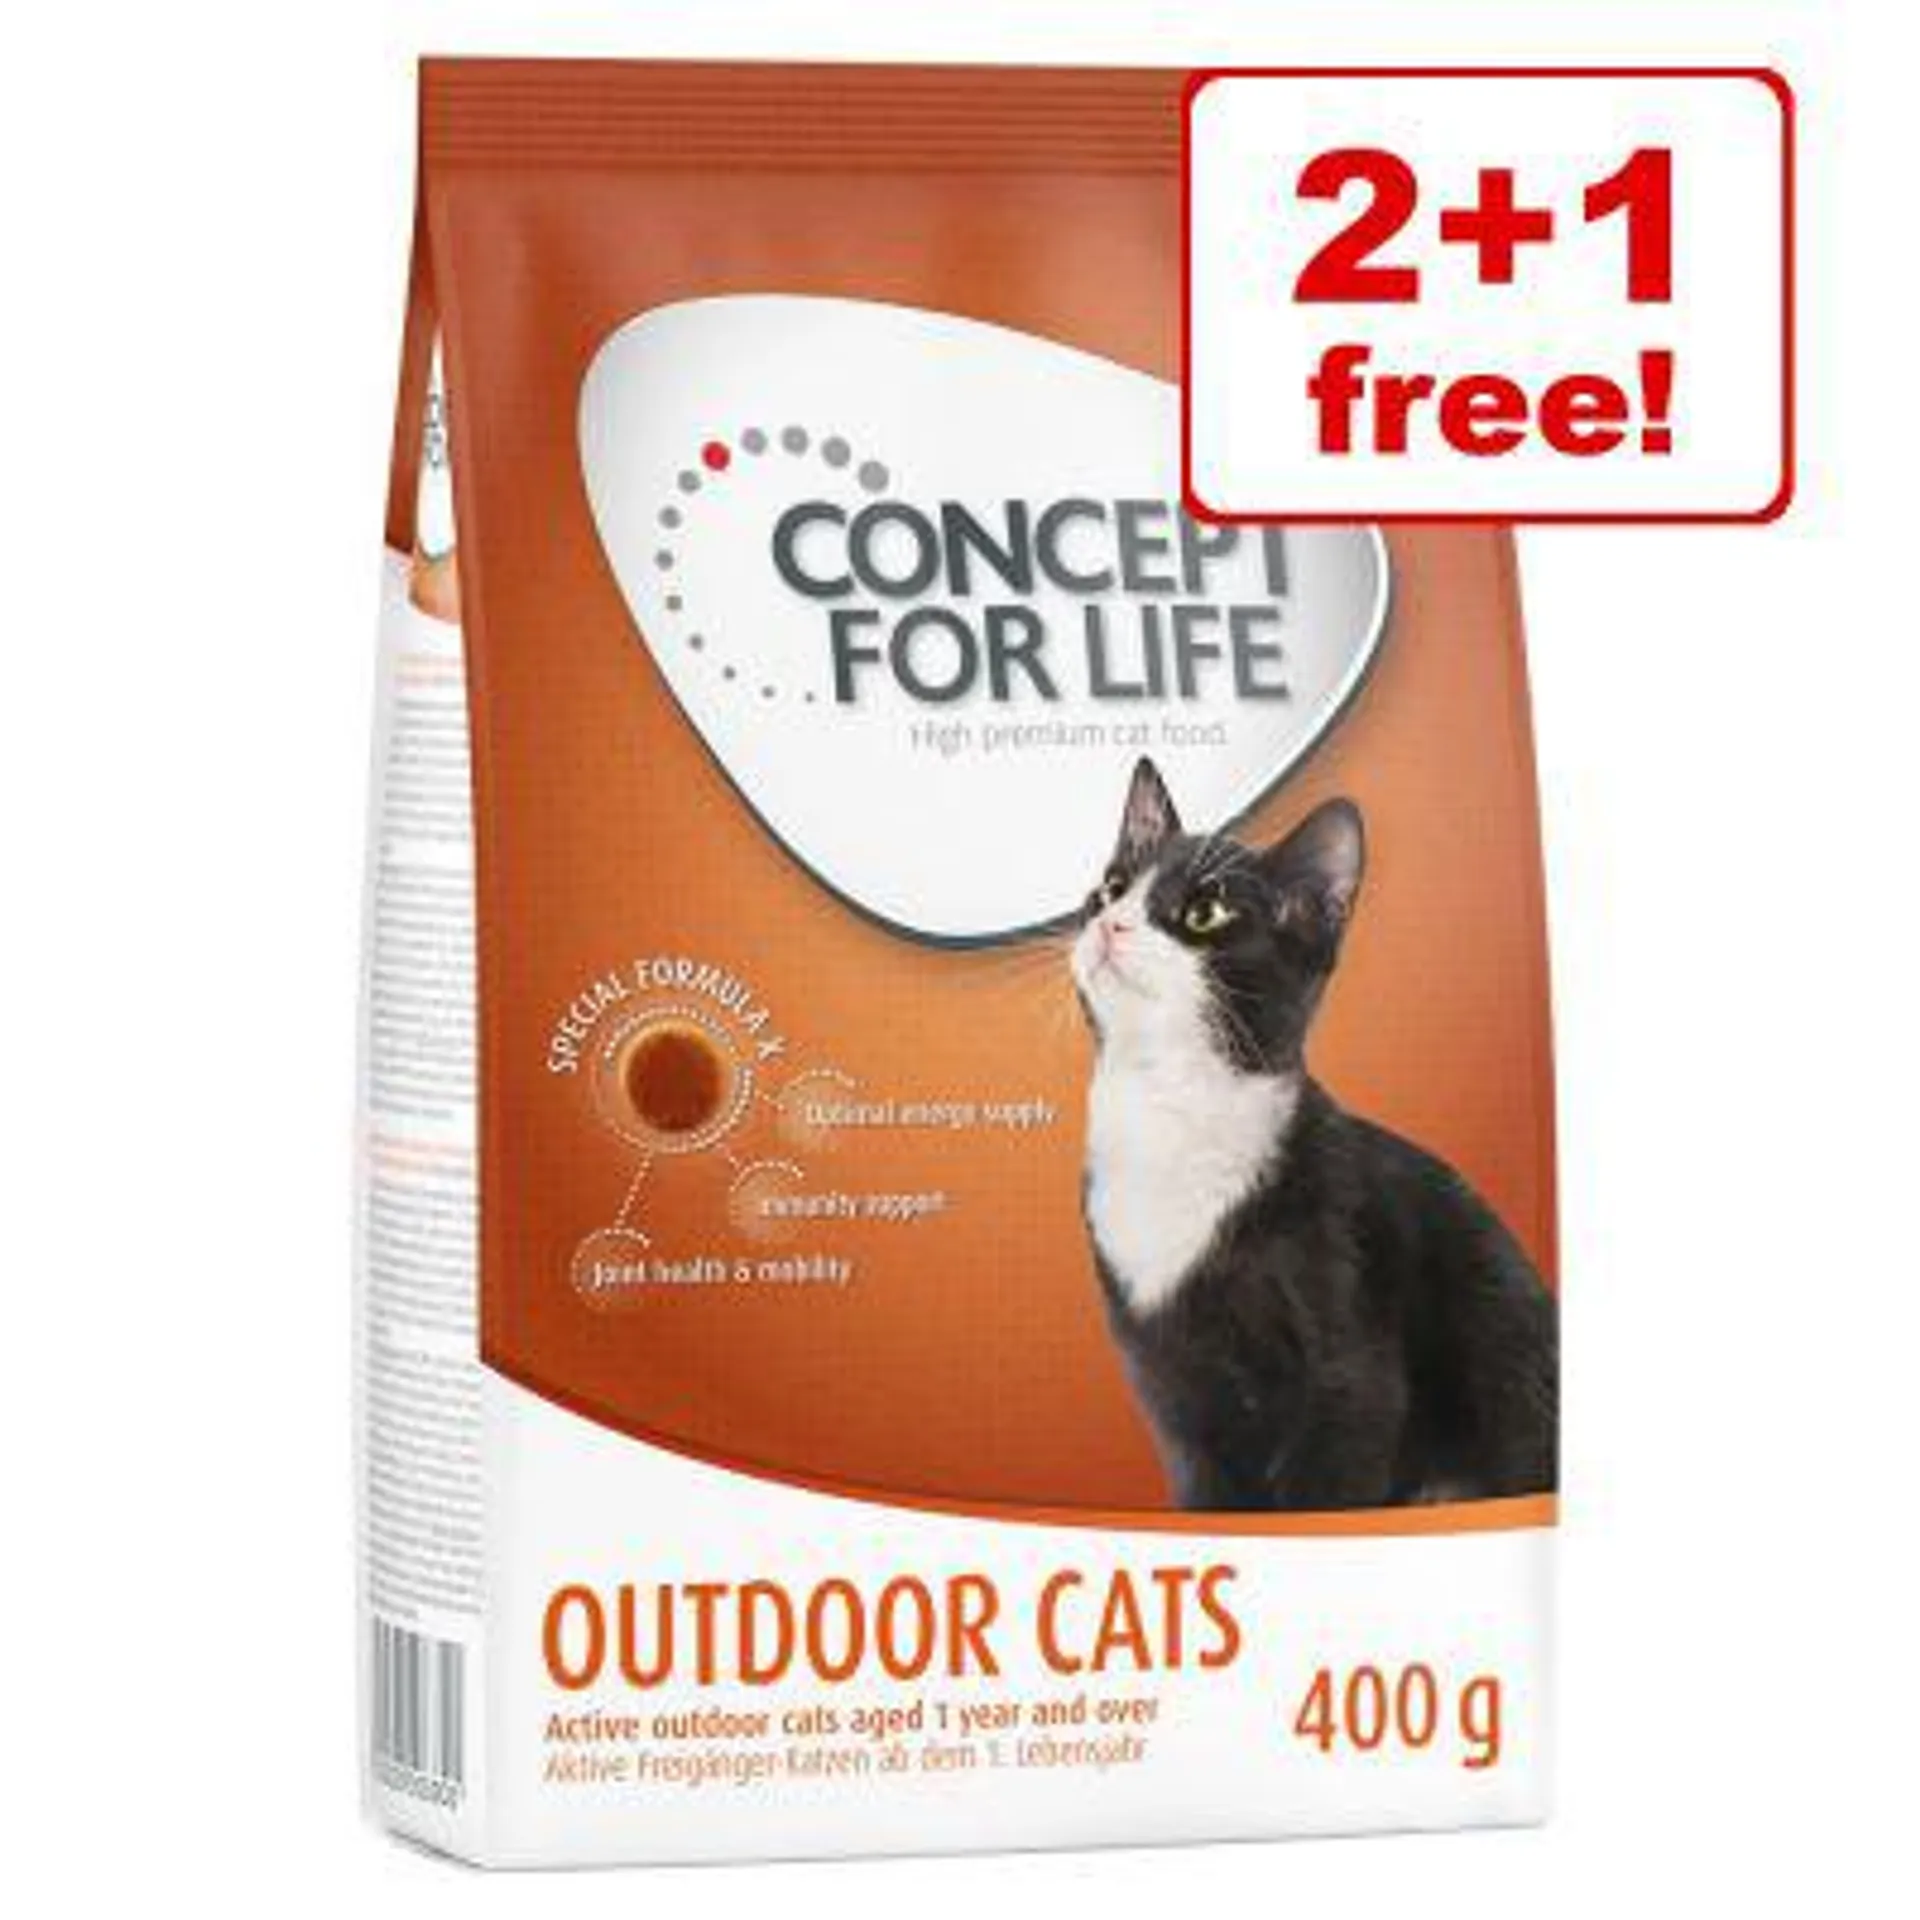 3 x 400g Concept for Life Dry Cat Food - 2 + 1 Free!*